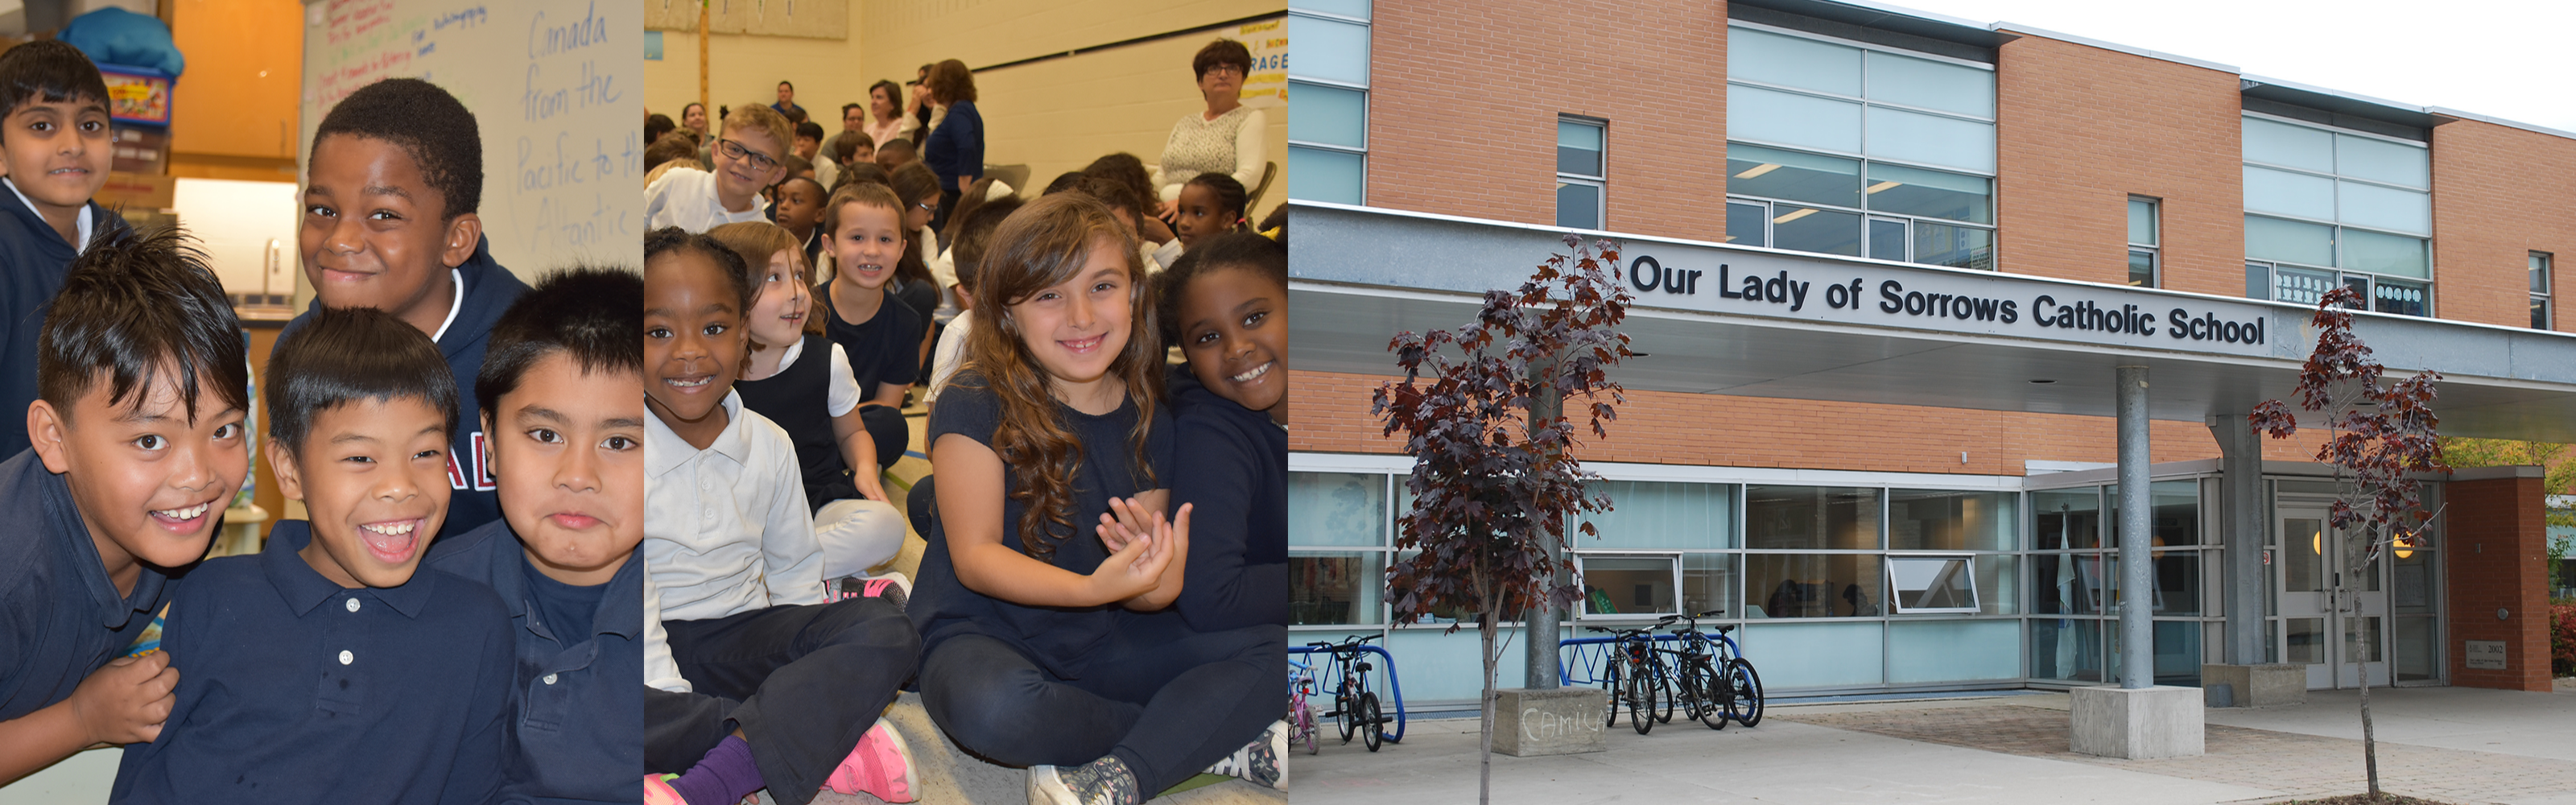 The two pictures on the left are of groups of elementary students in navy and white school uniforms. The picture on the right is of the front of the school building.